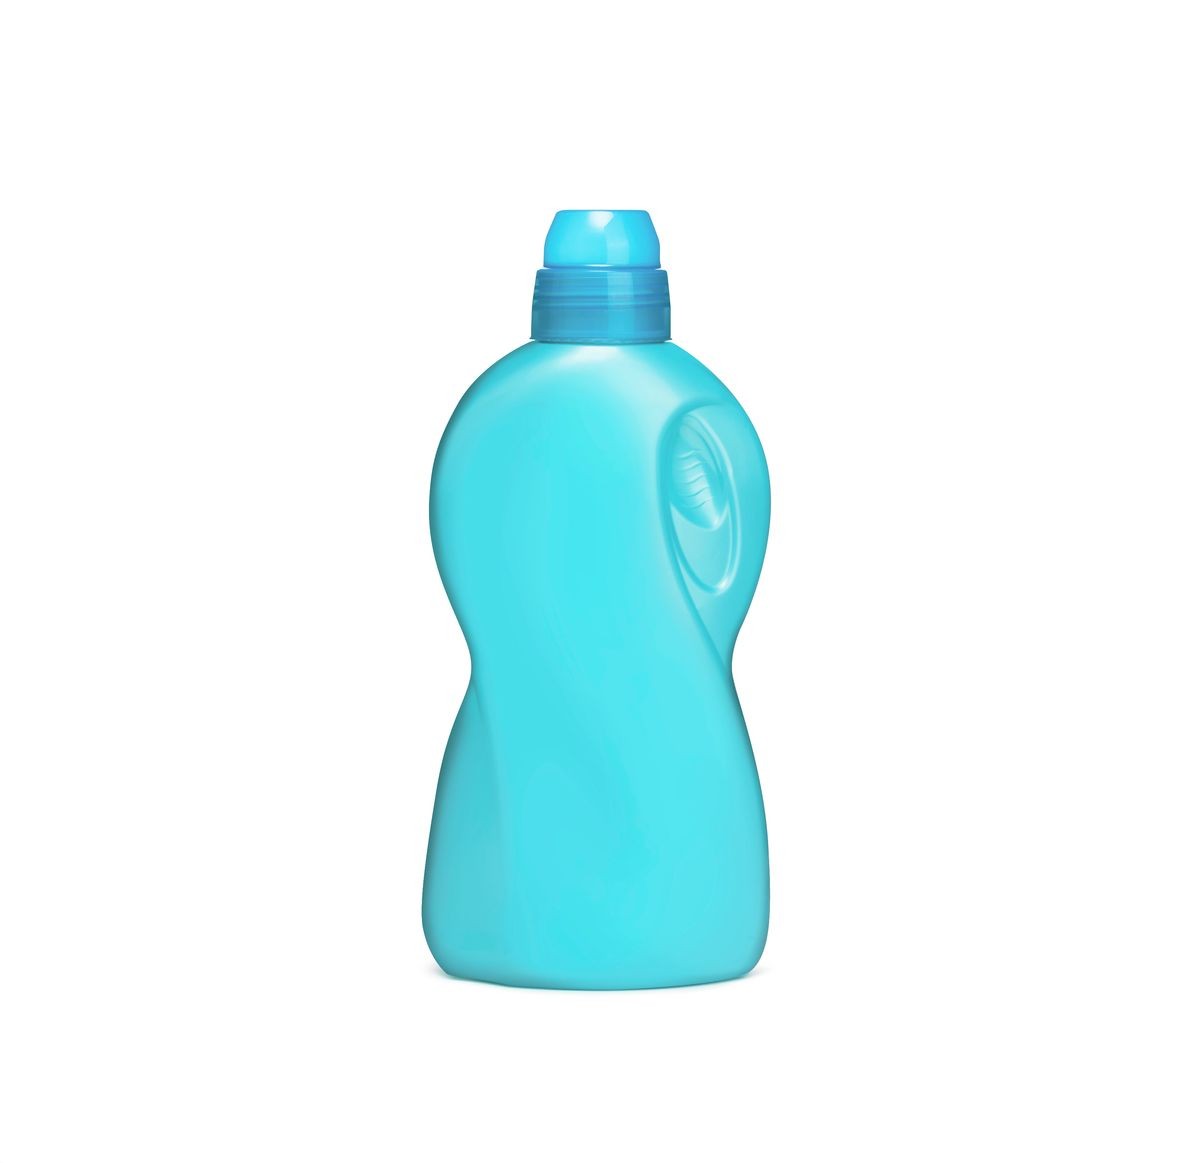 Plastic chemical bottle isolated on white background. With clipping path